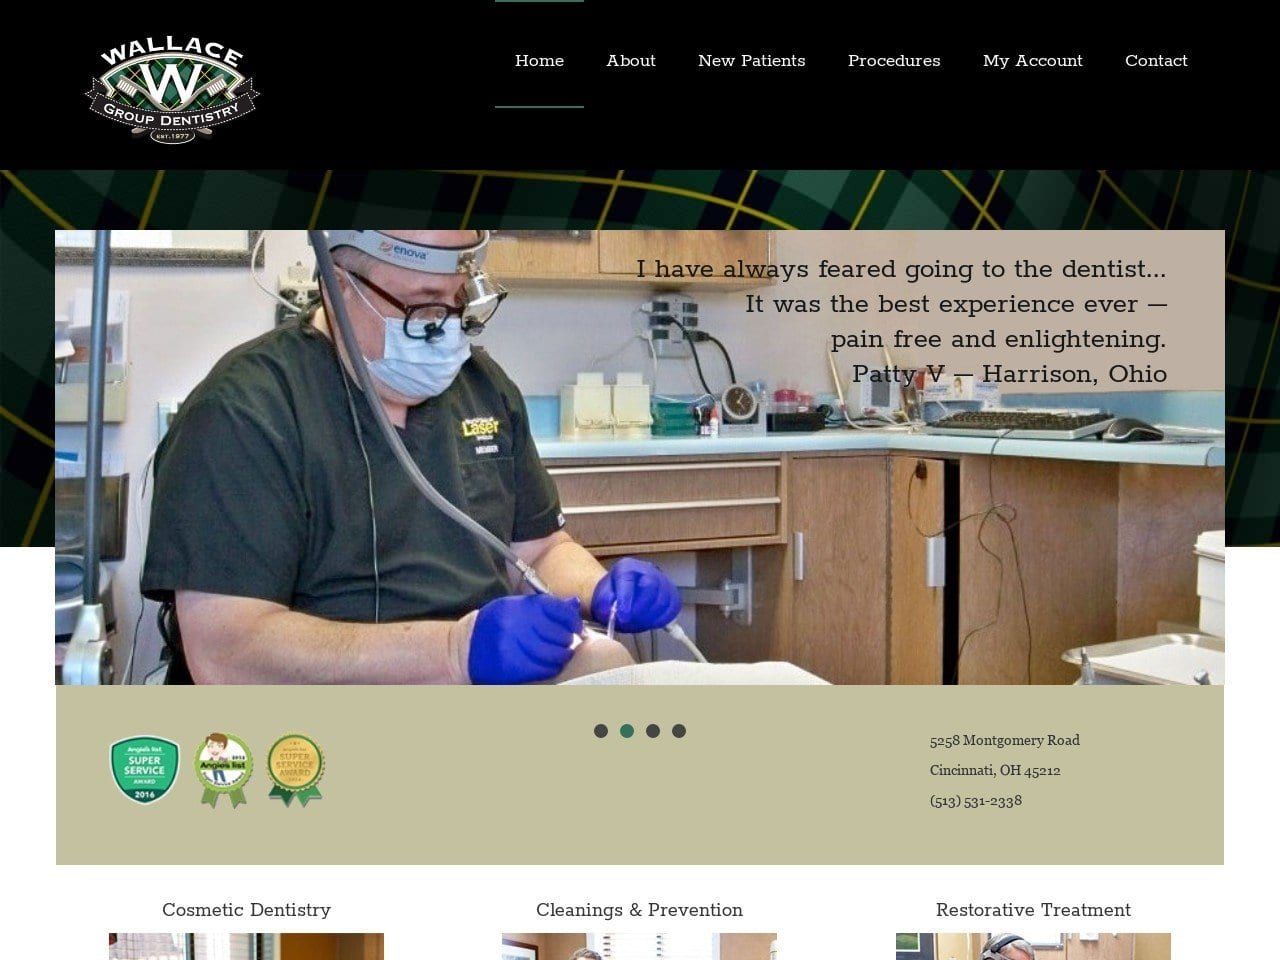 William R. Wallace D.D.S. Website Screenshot from wallacegroupdentistry.com